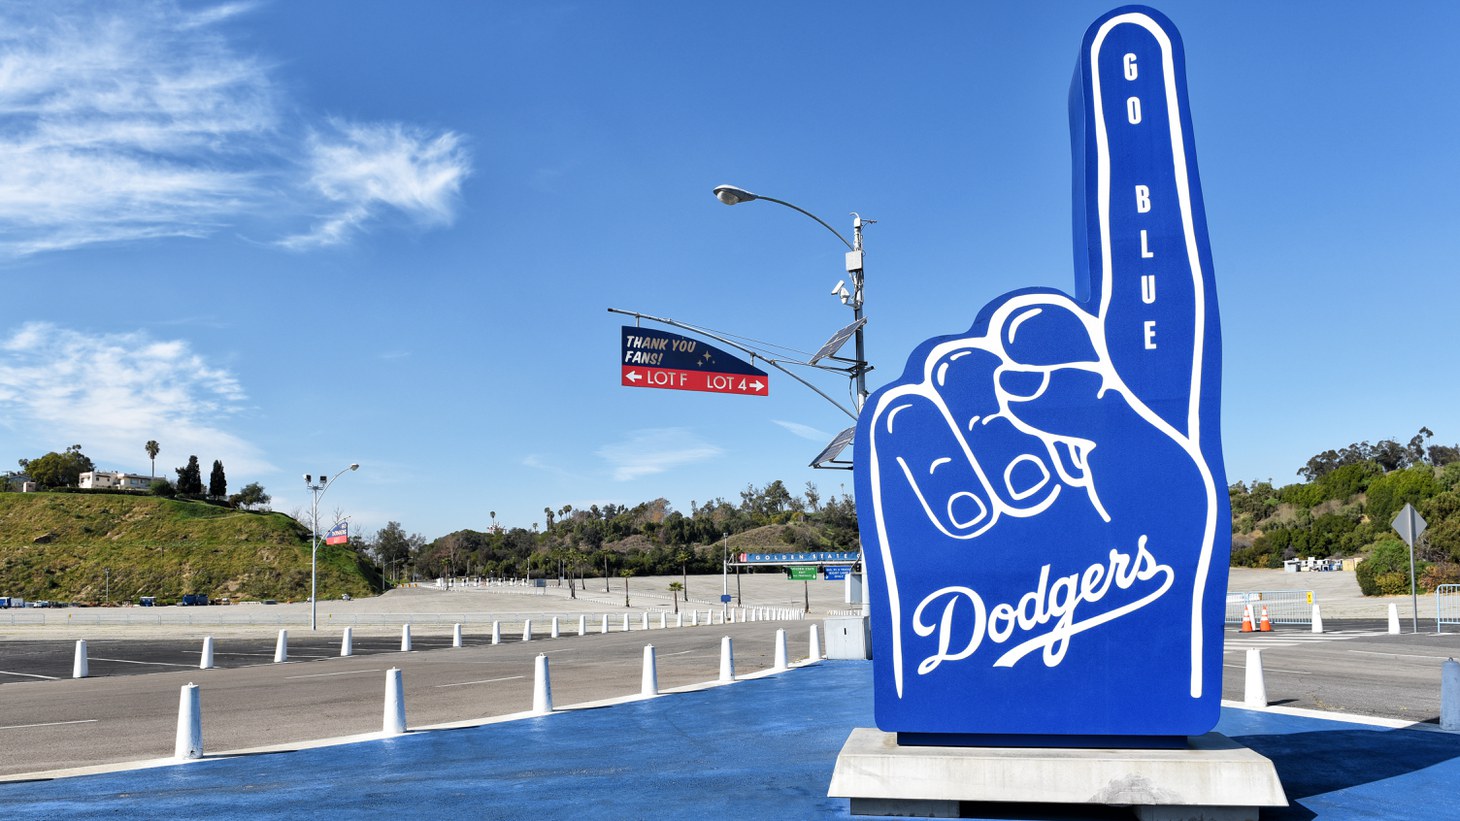 Los Angeles Dodgers Reception and Game Herman Ostrow School of